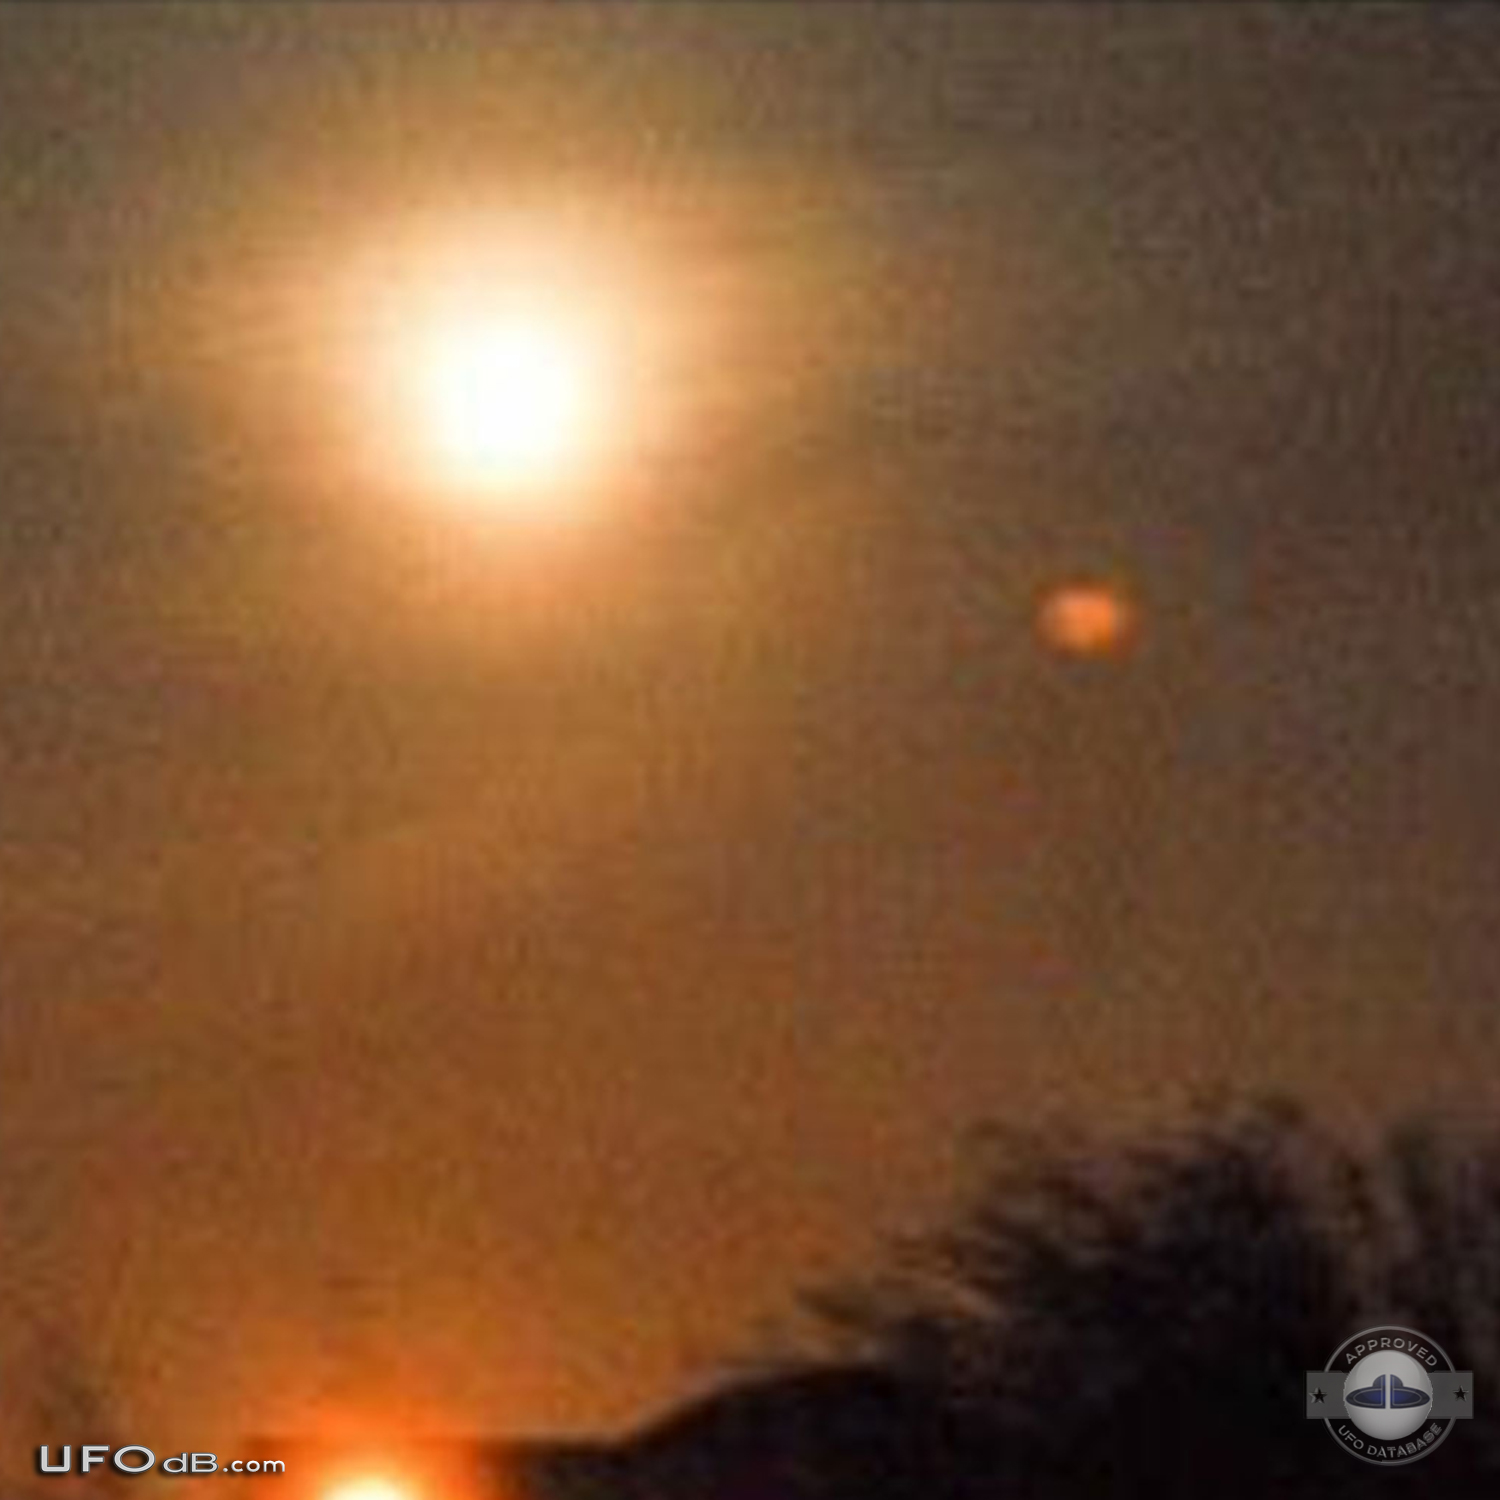 Glowing Orange Sphere UFO caught on picture in Sheffield UK in 2012 UFO Picture #485-3